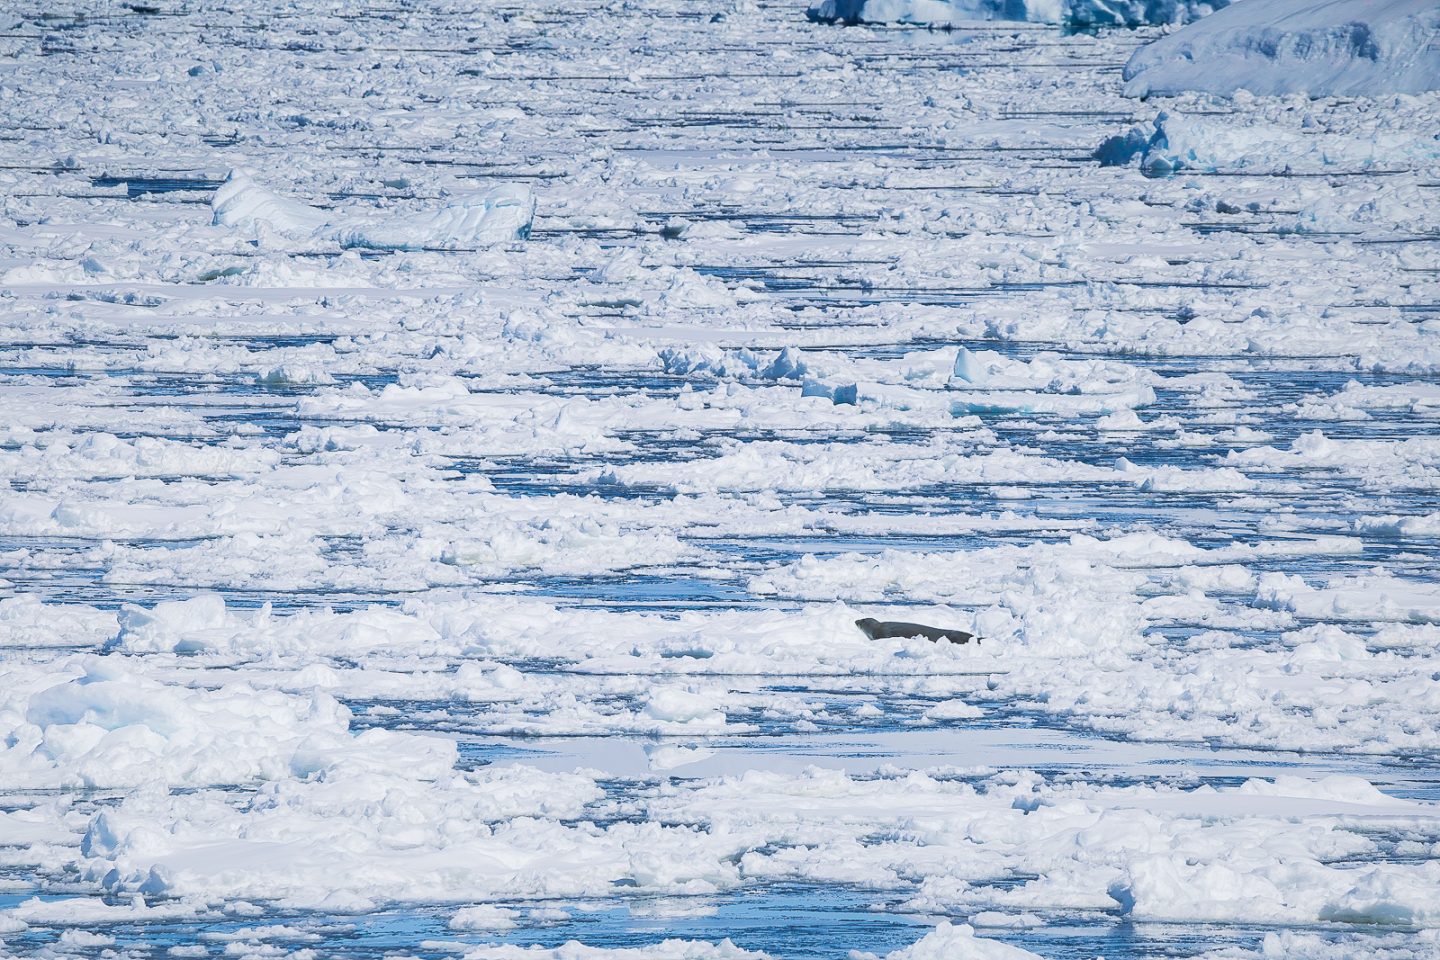 Weddell seal on the ice ahead of us, Lemaire Channel, Antarctica